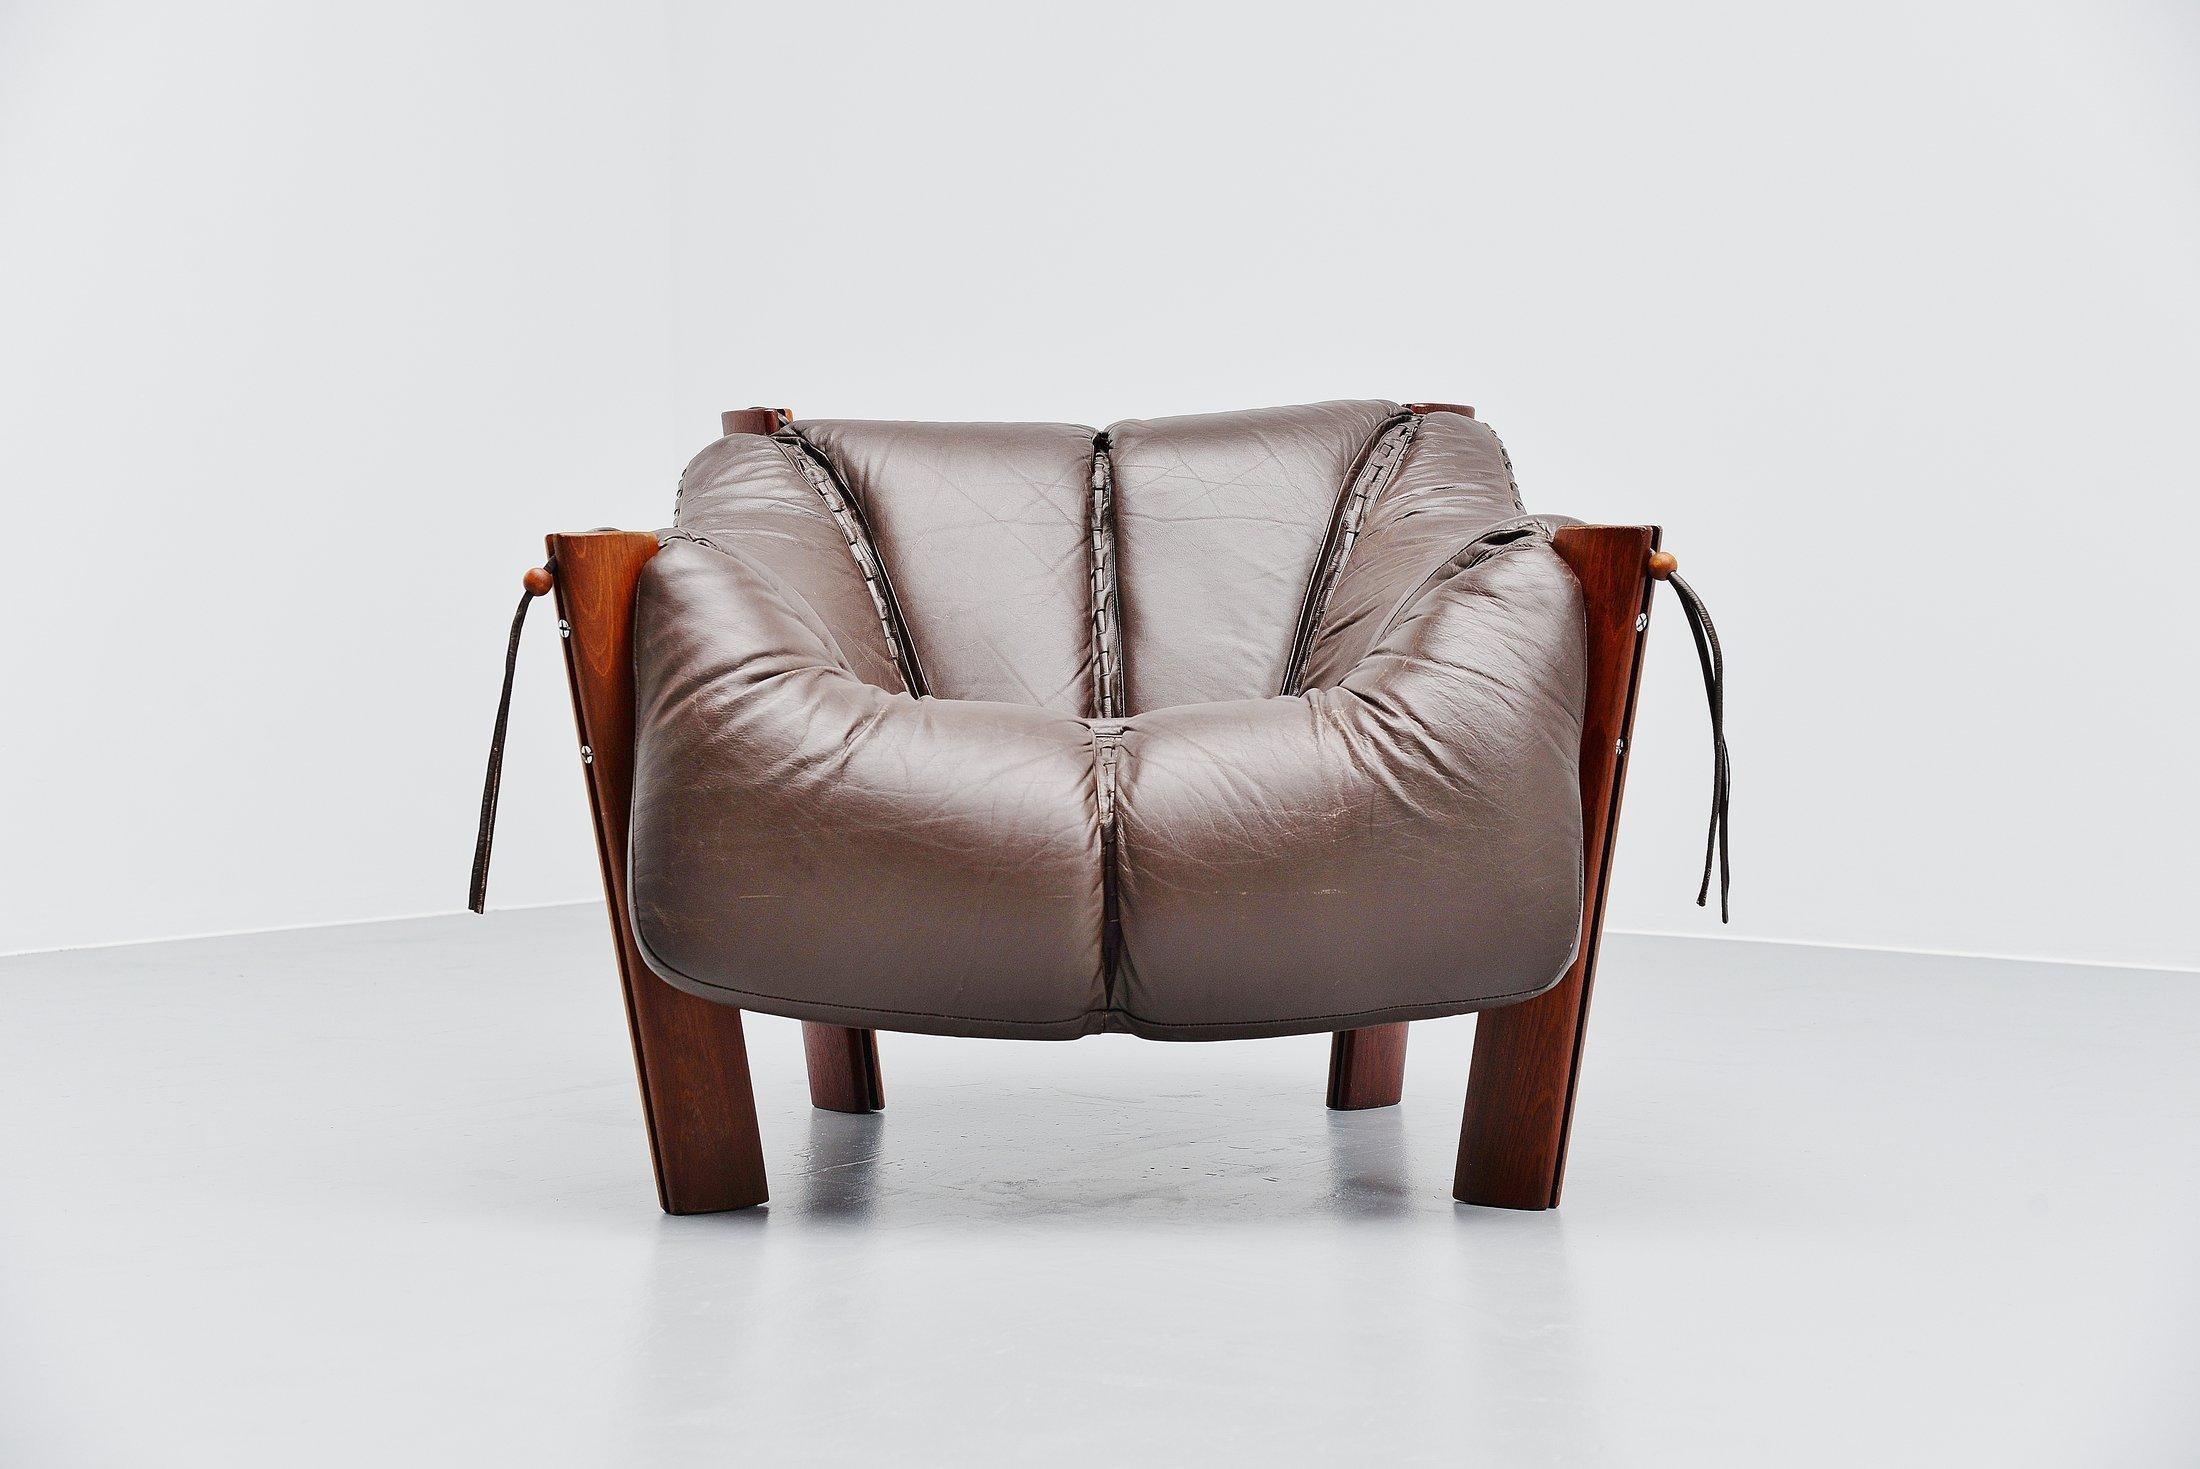 Very nice comfortable lounge chair designed and manufactured by Percival Lafer, Brazil, 1960. This chair has 4 mahogany legs and a dark brown leather seat. The legs are connected with chrome screws, nicely shaped. Very nice and typical Brazilian